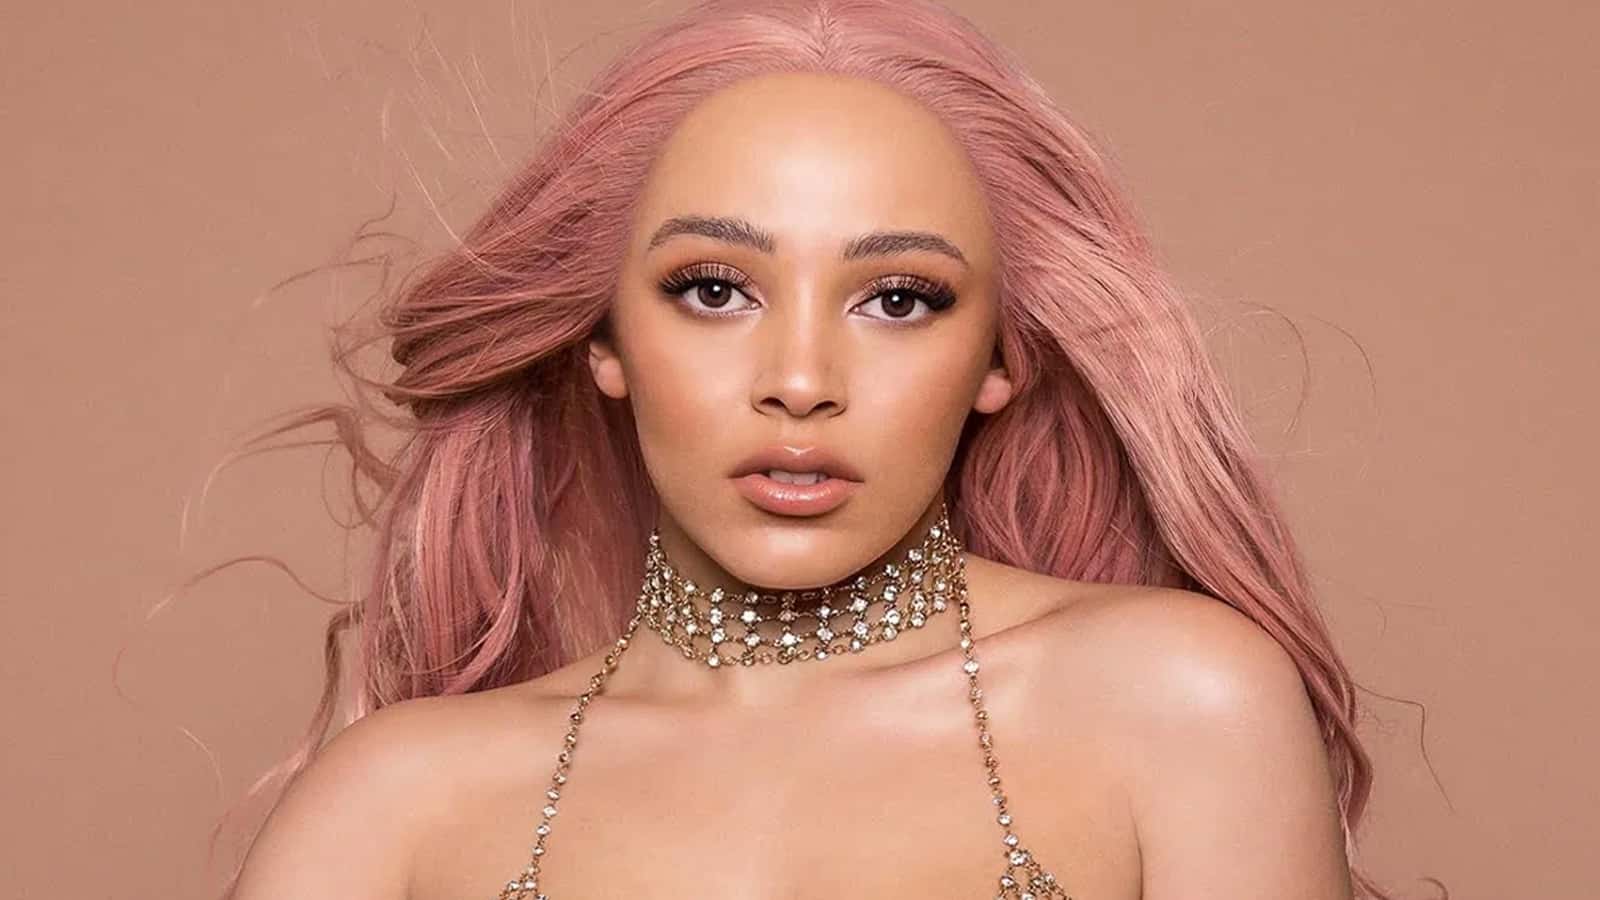 What is going on with Doja Cat's TikTok account? Rapper's videos